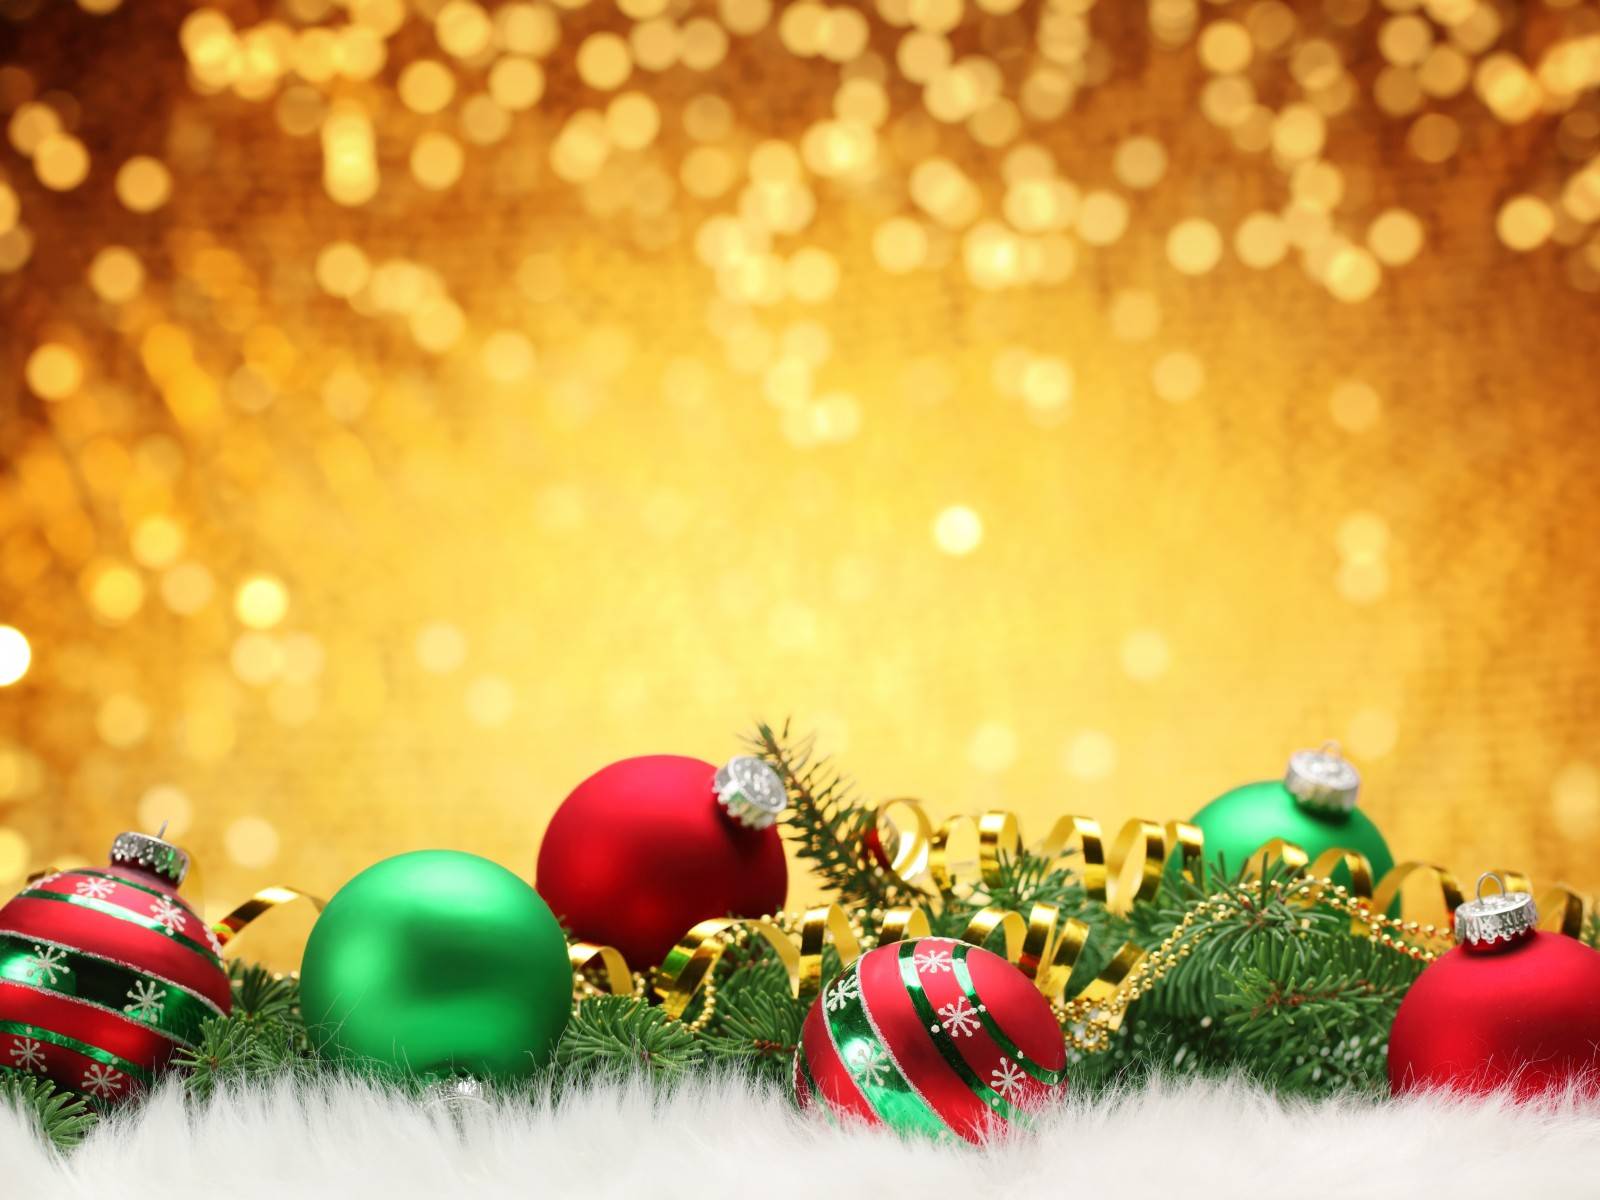 Xmas backgrounds free   SF Wallpaper